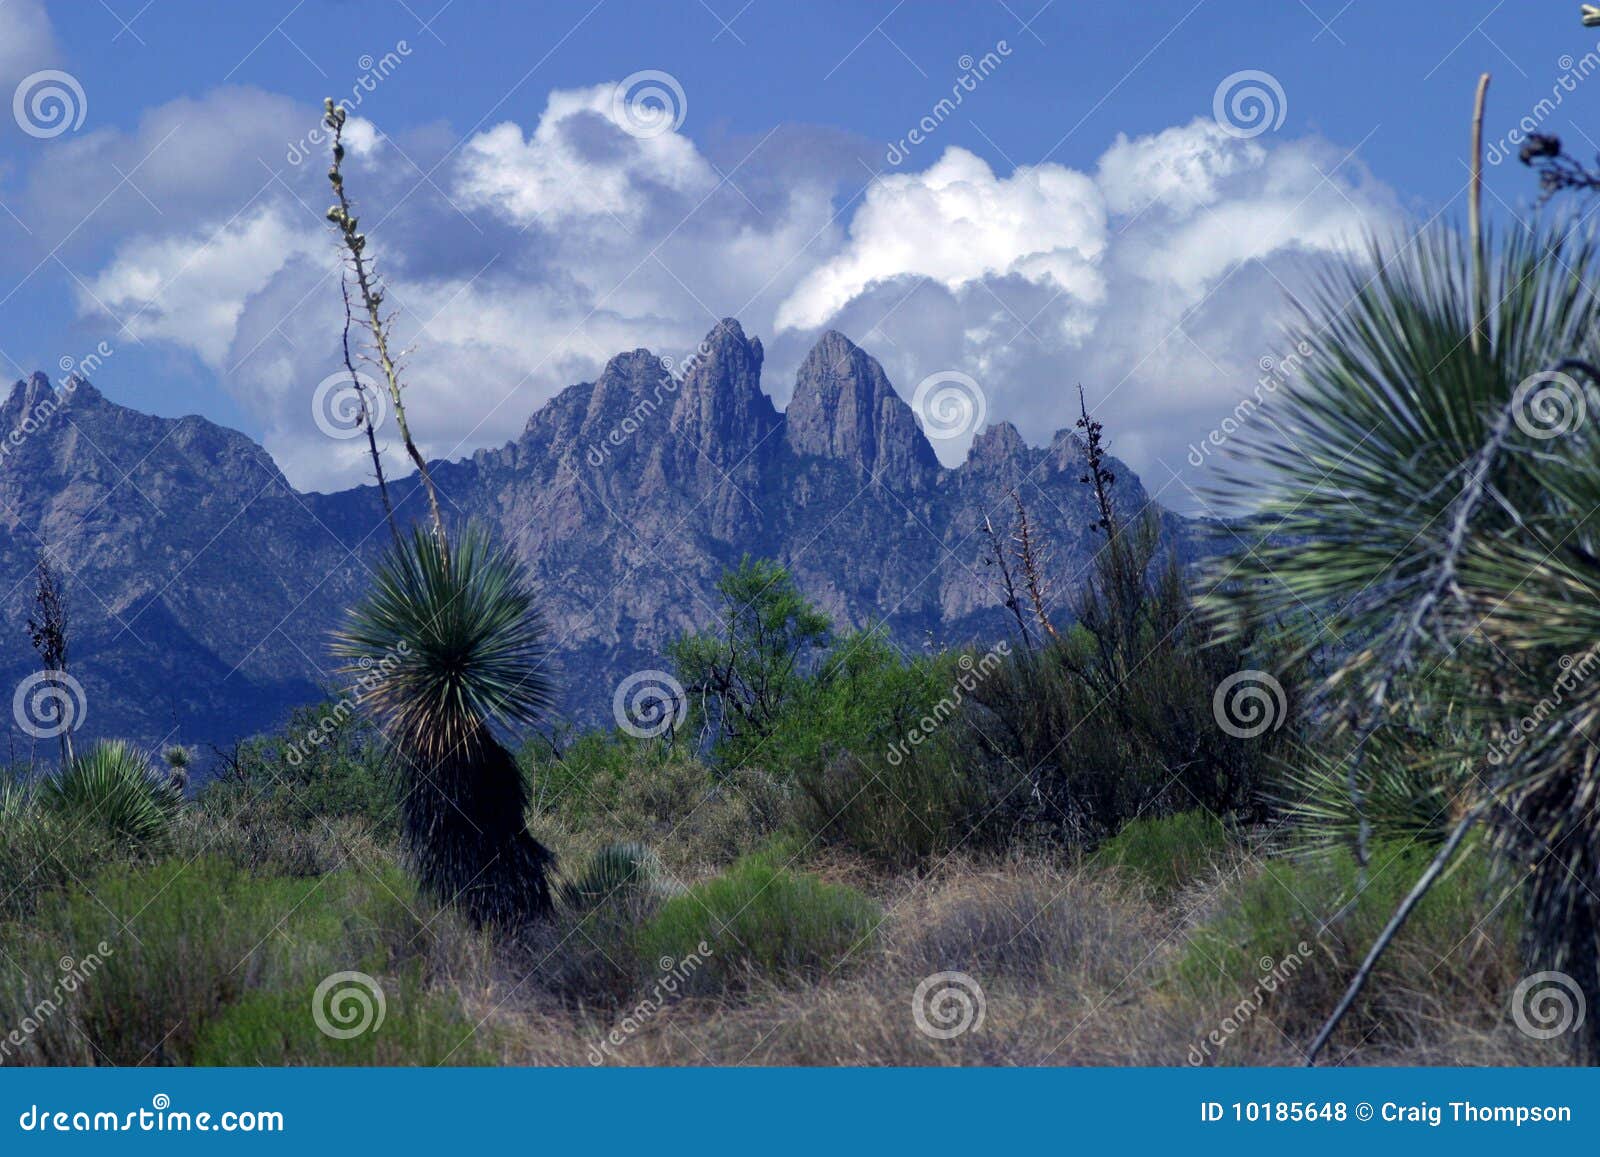 las cruces mountains